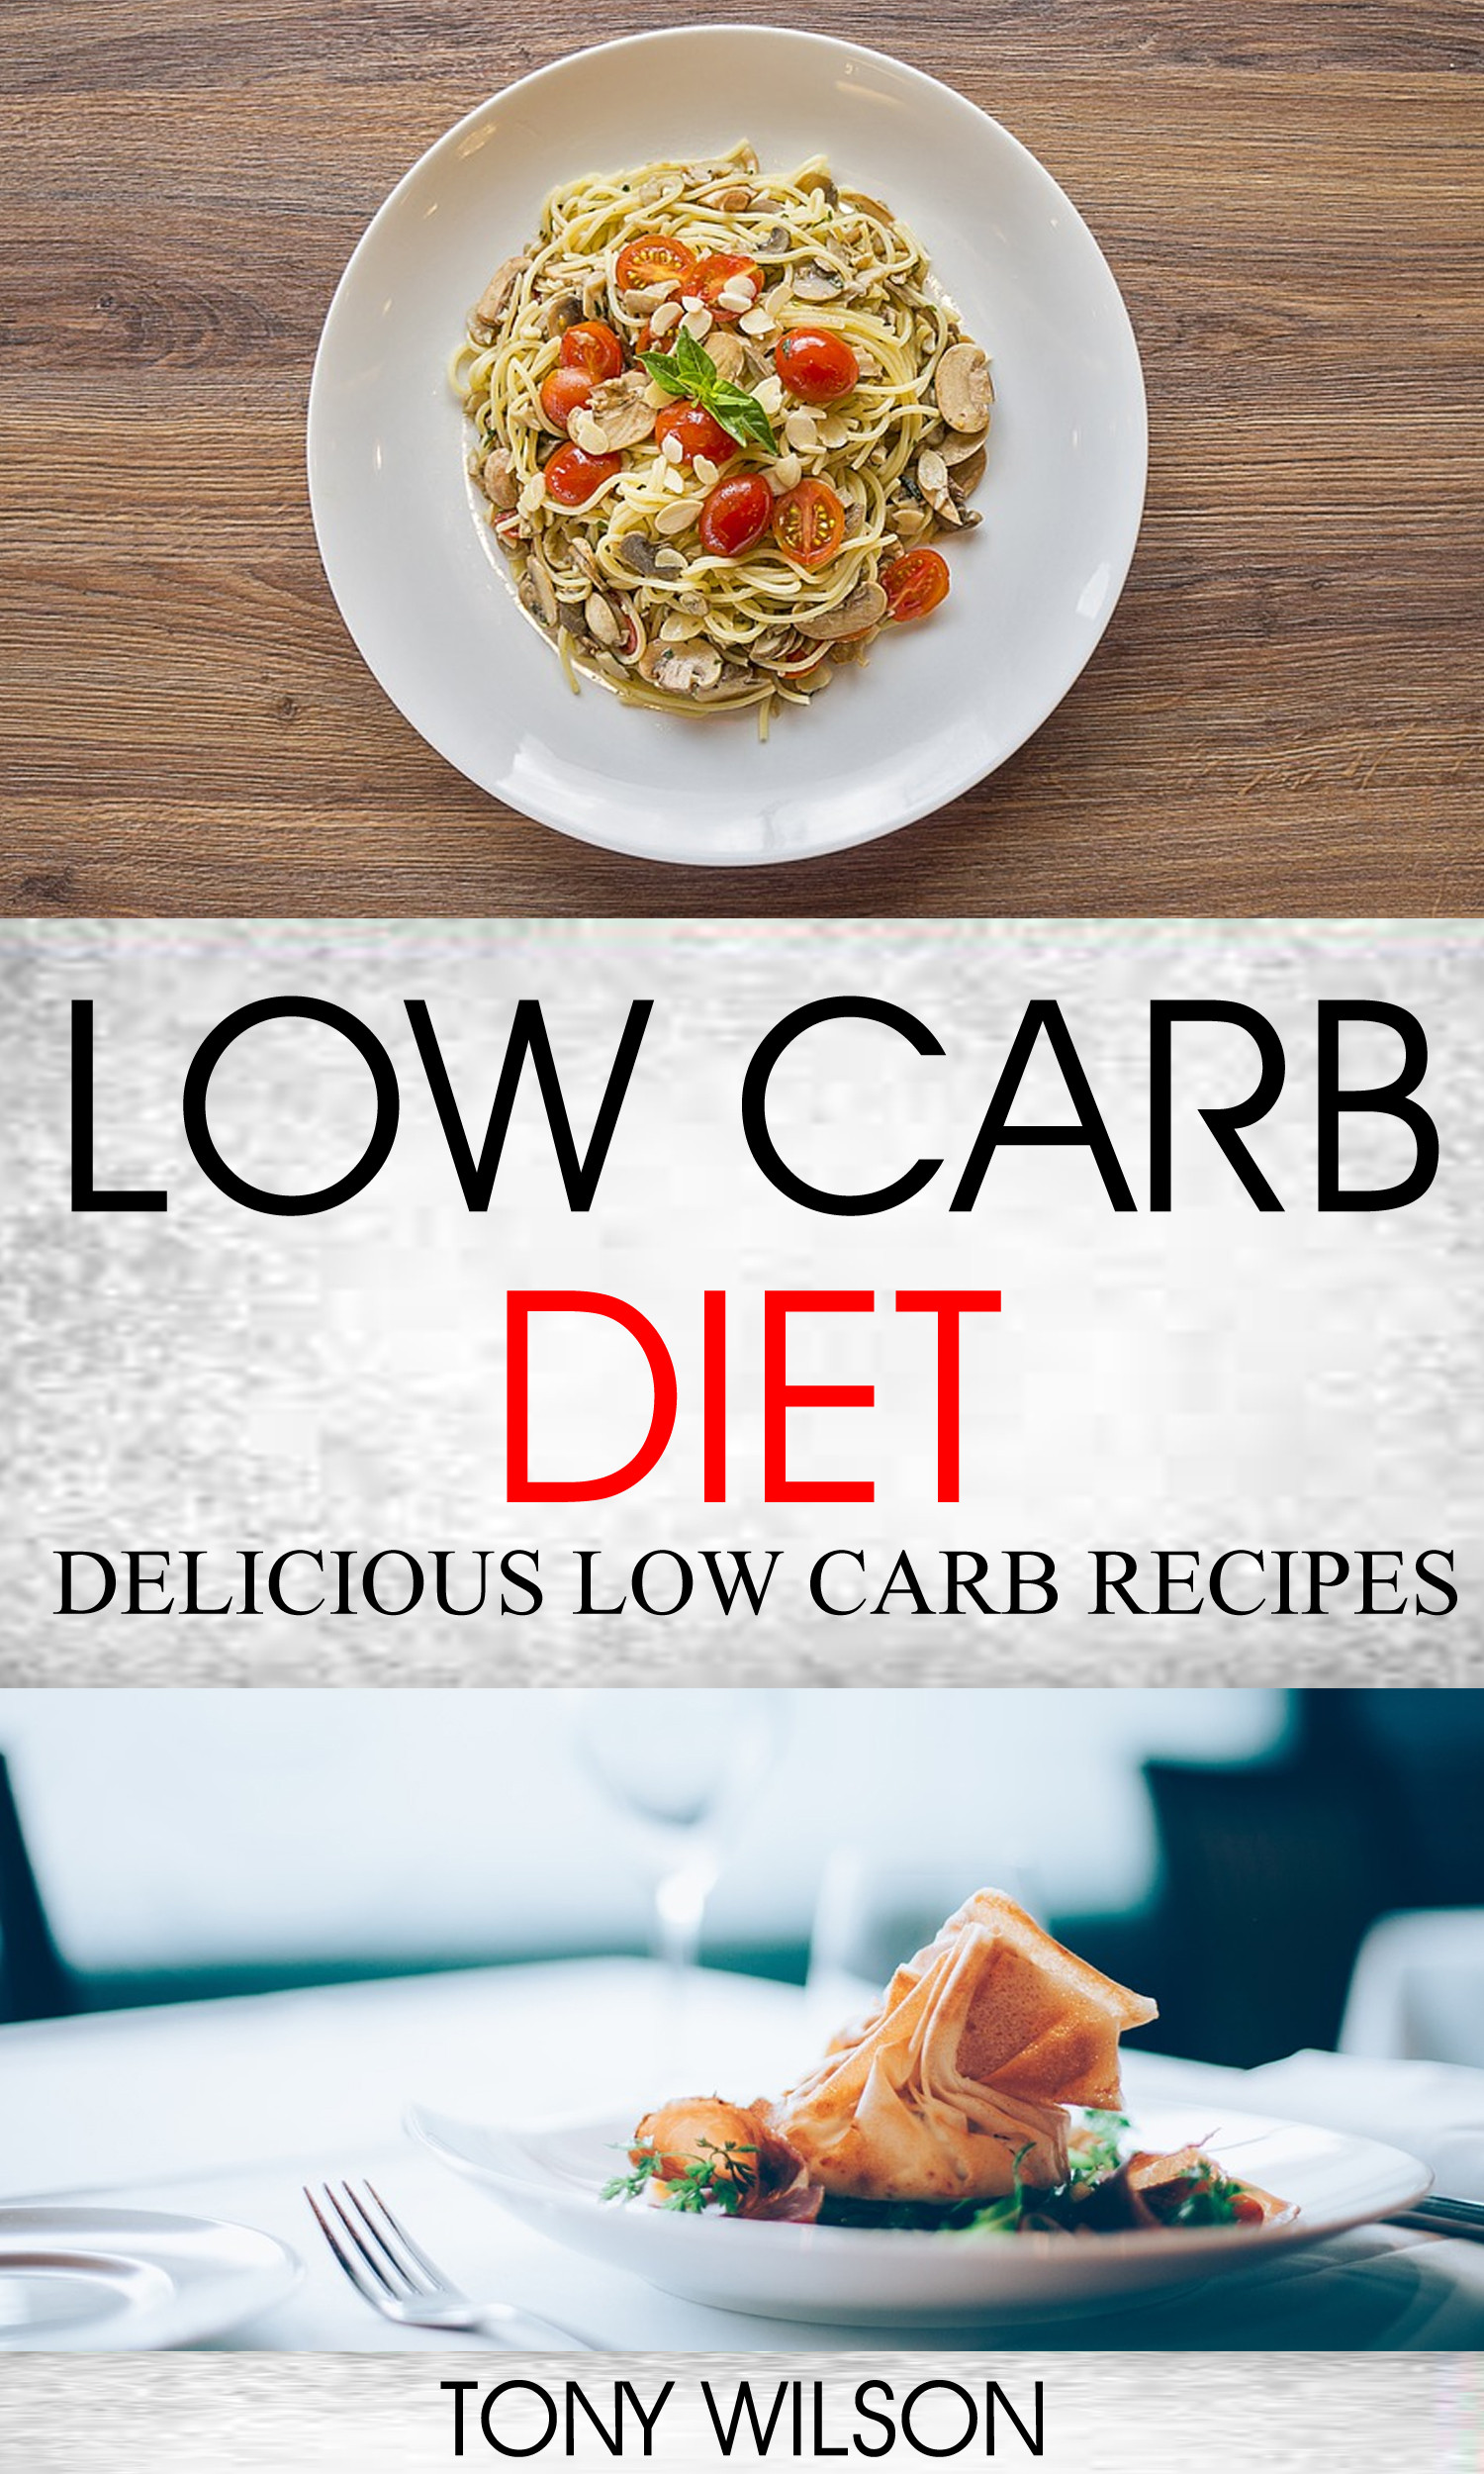 Low Carbohydrate Diet Recipes
 Smashwords – Low Carb Diet Delicious Low Carb Recipes – a